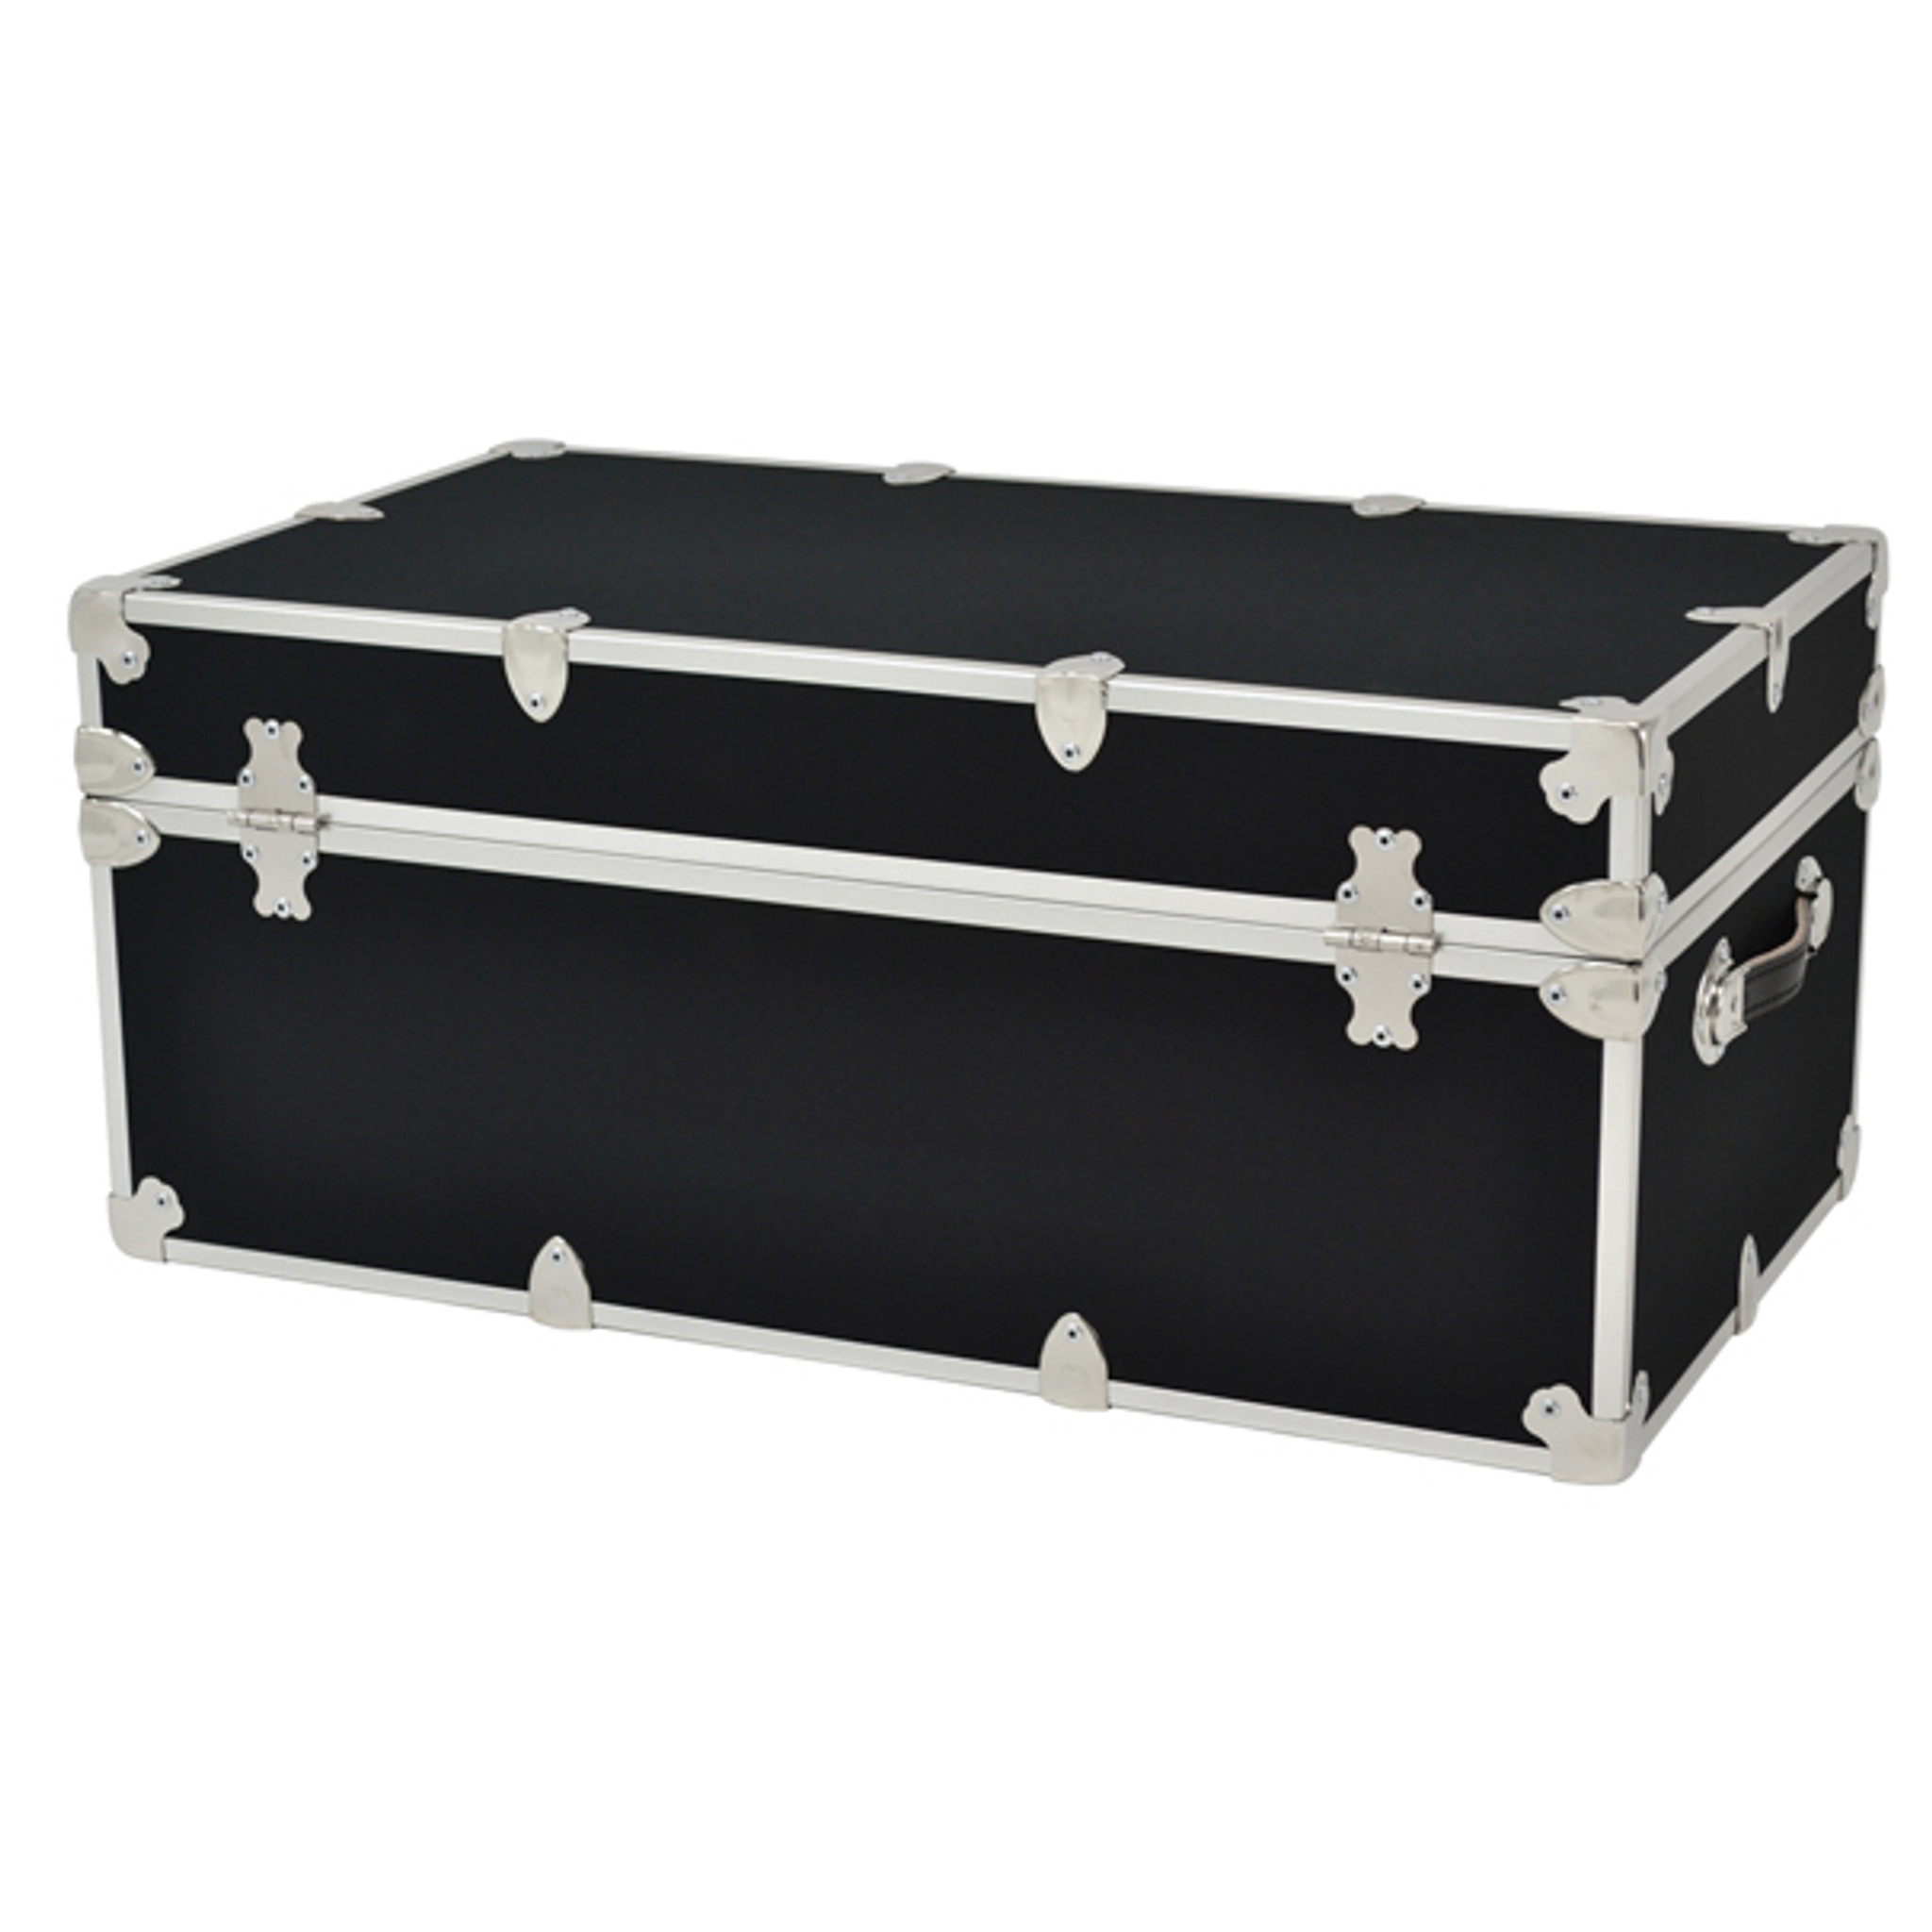 Rhino Trunk & Case XL Leather Embossed Vinyl Trunk with Removable